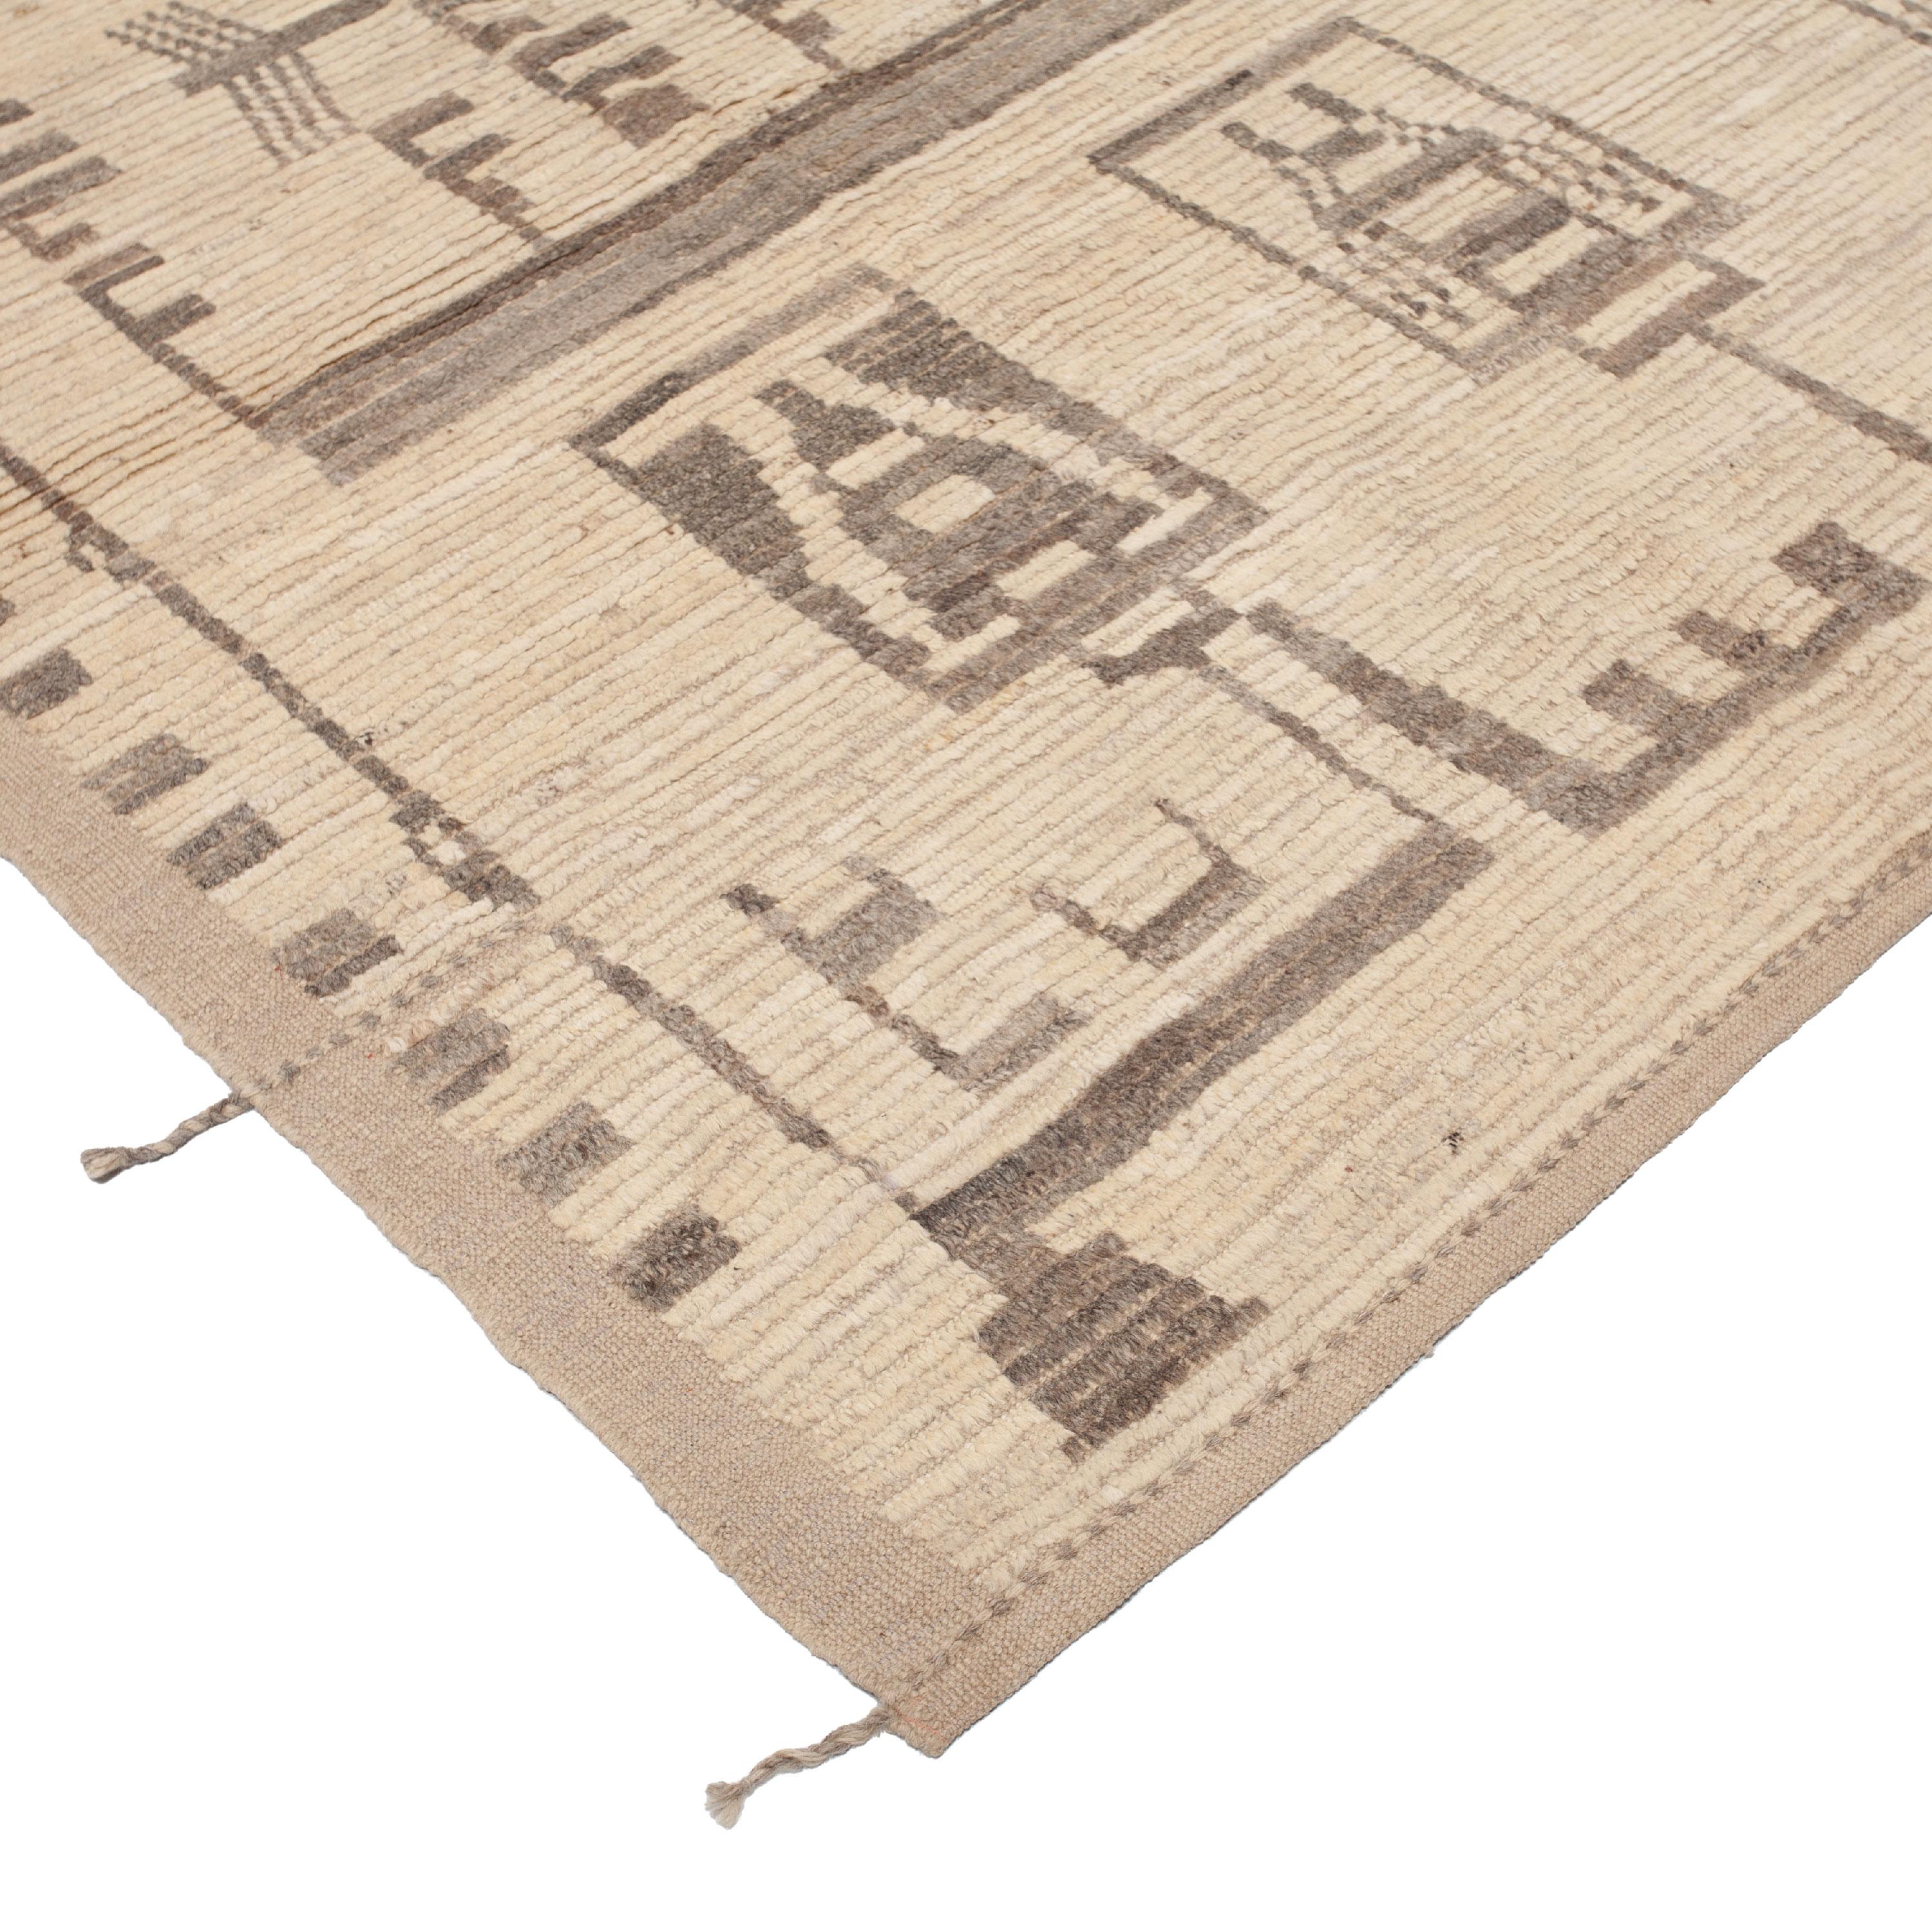 Mid-Century Modern abc carpet Zameen Beige and Grey Tribal Wool Rug - 11' x 14' For Sale